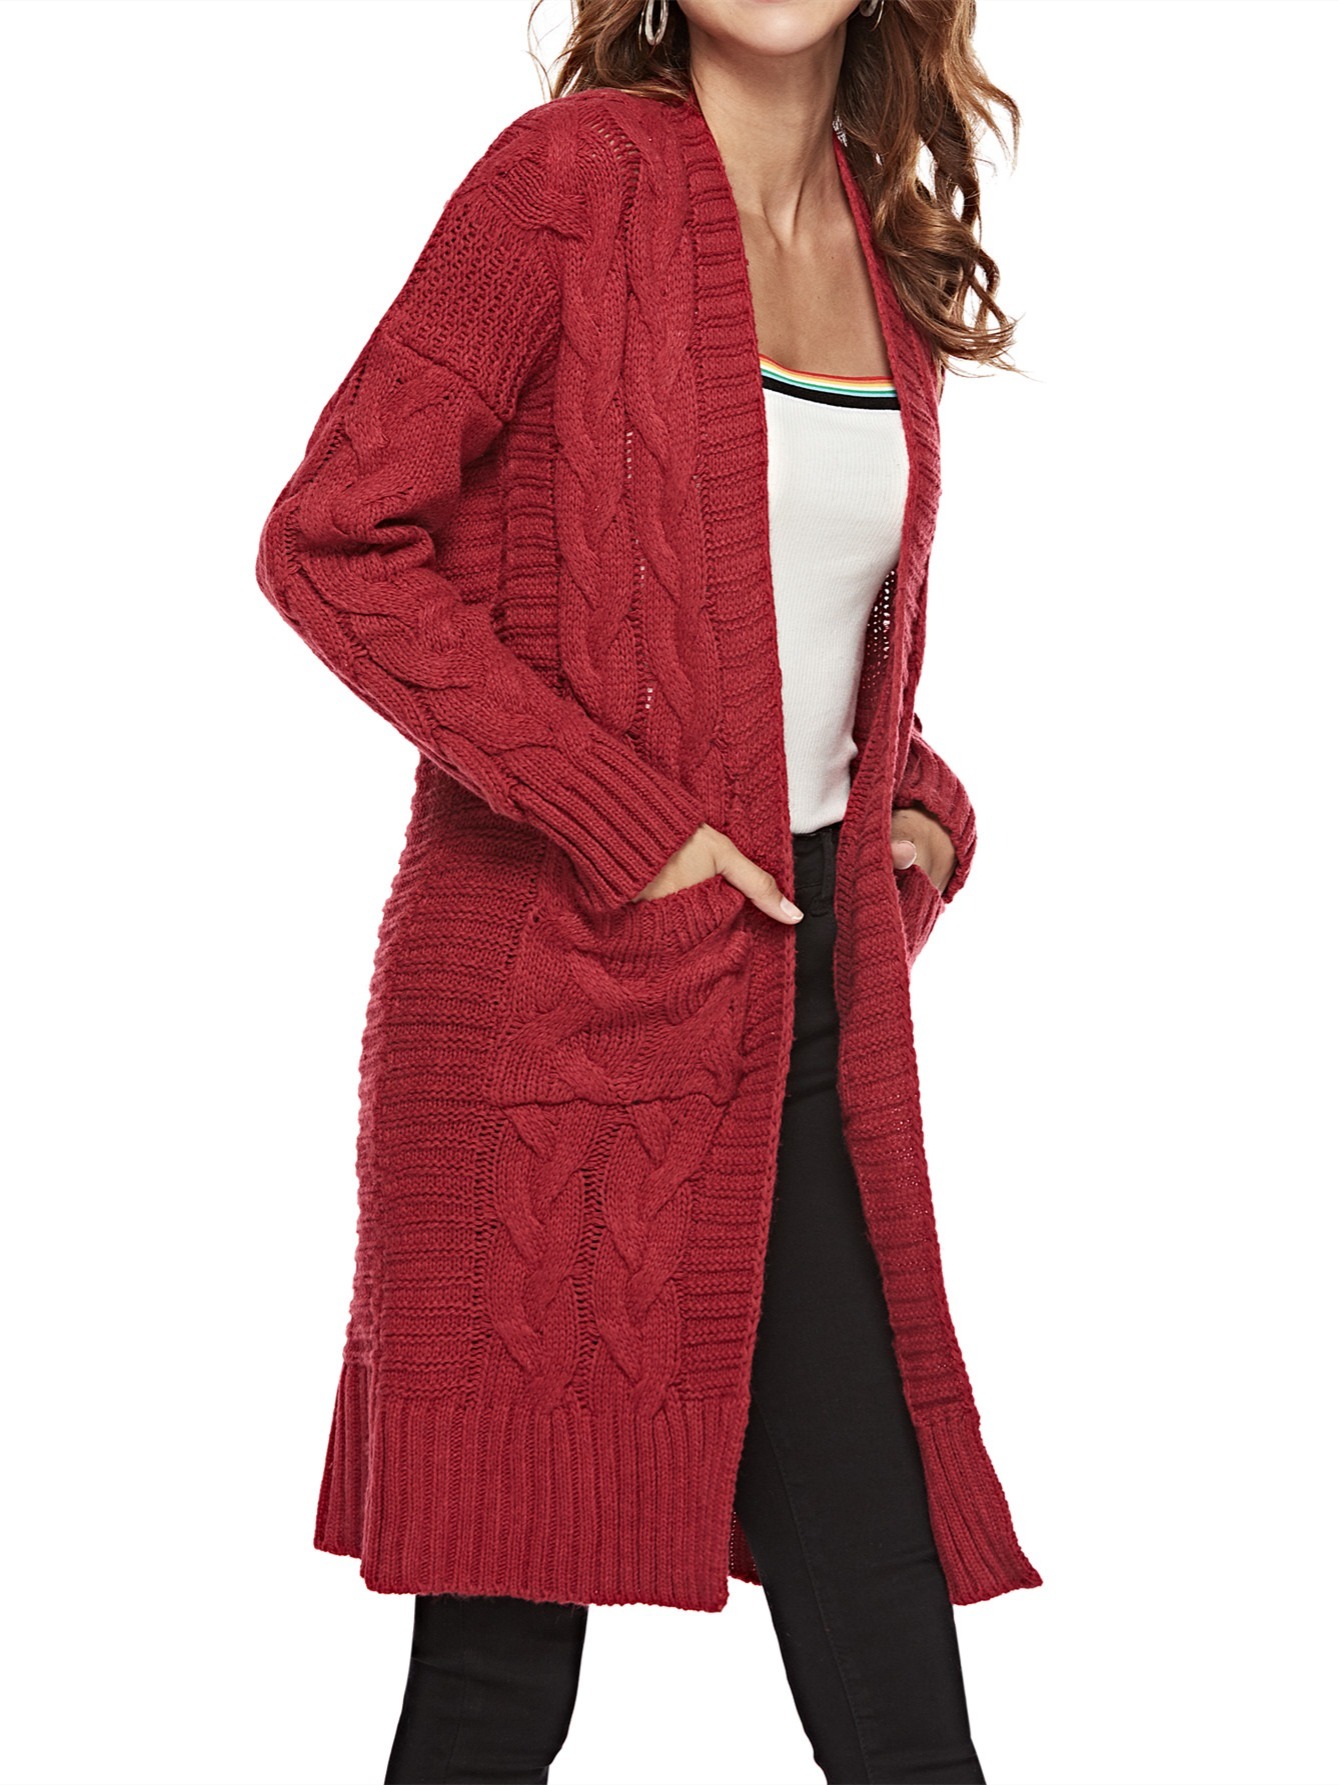 Long Duster Open-Front Cardigan Sweater for Women